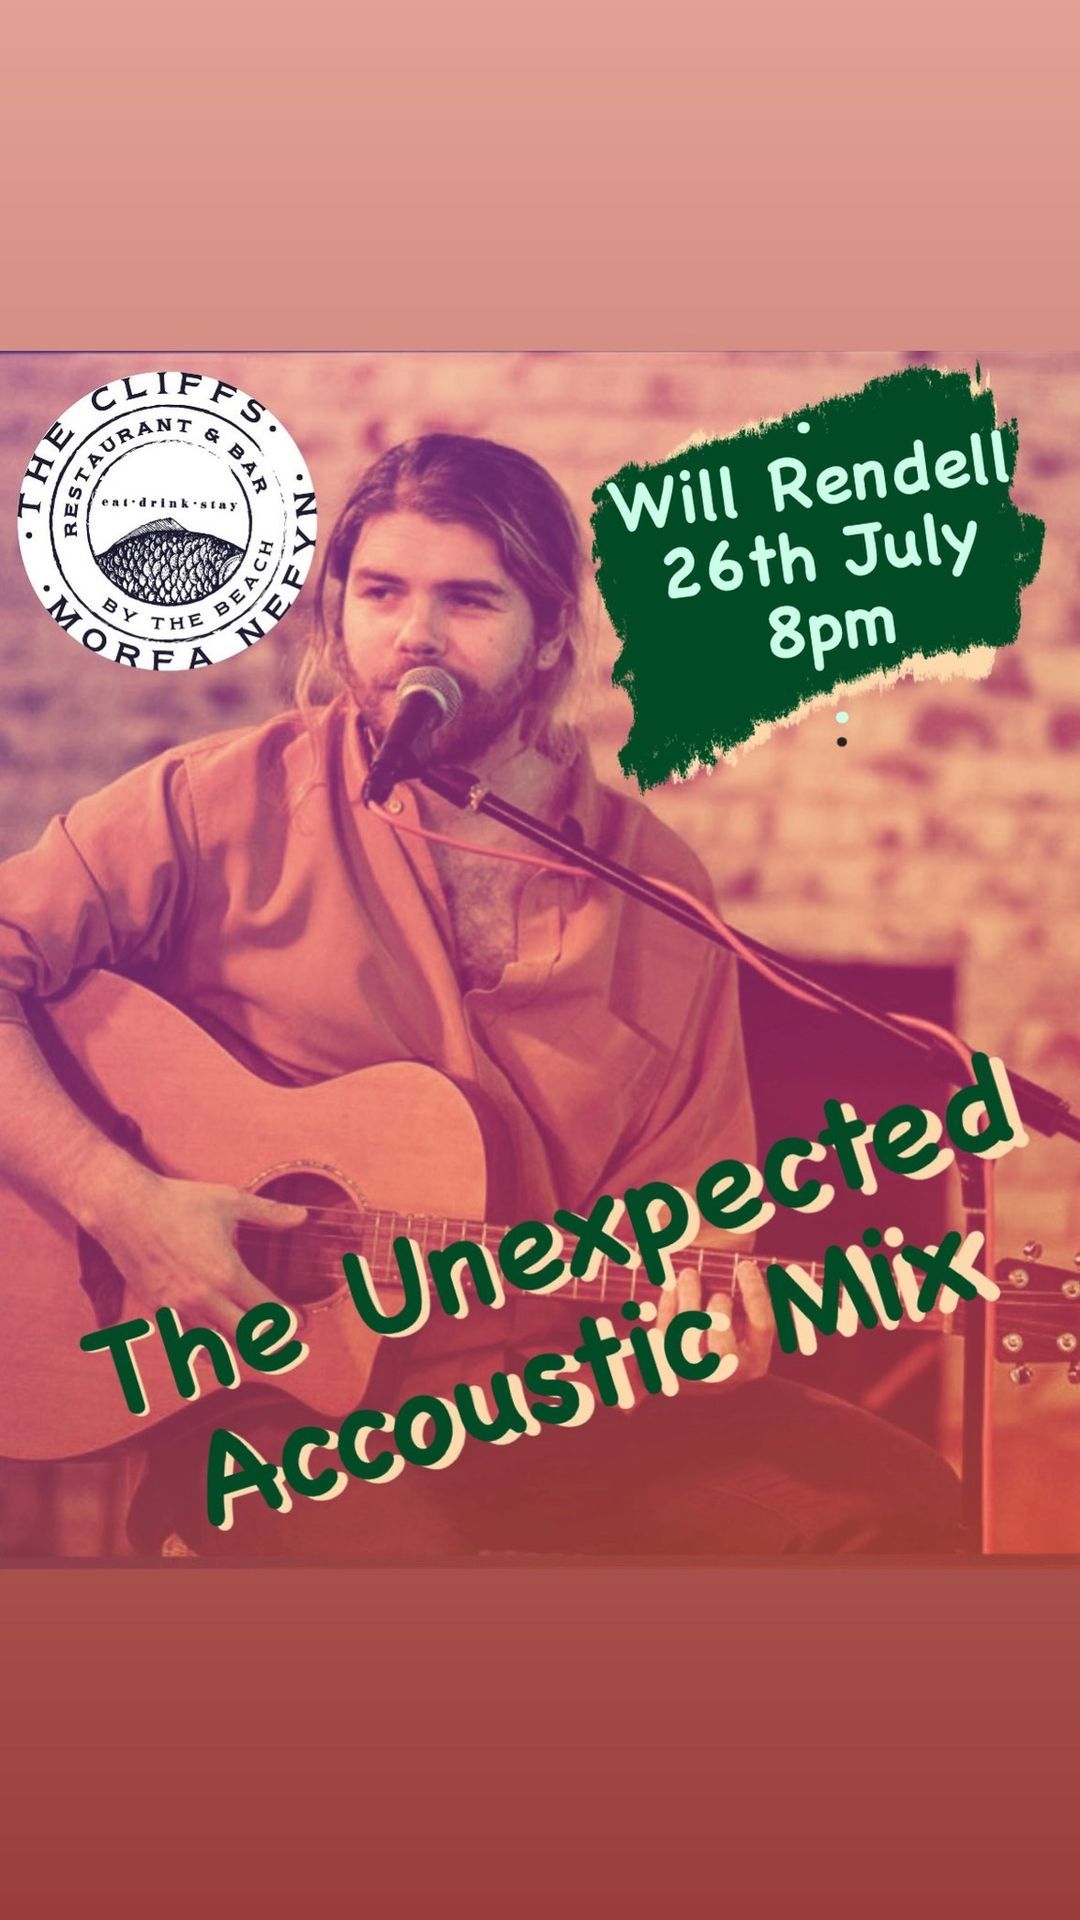 Will Rendell - The Unexpected Accoustic Mix